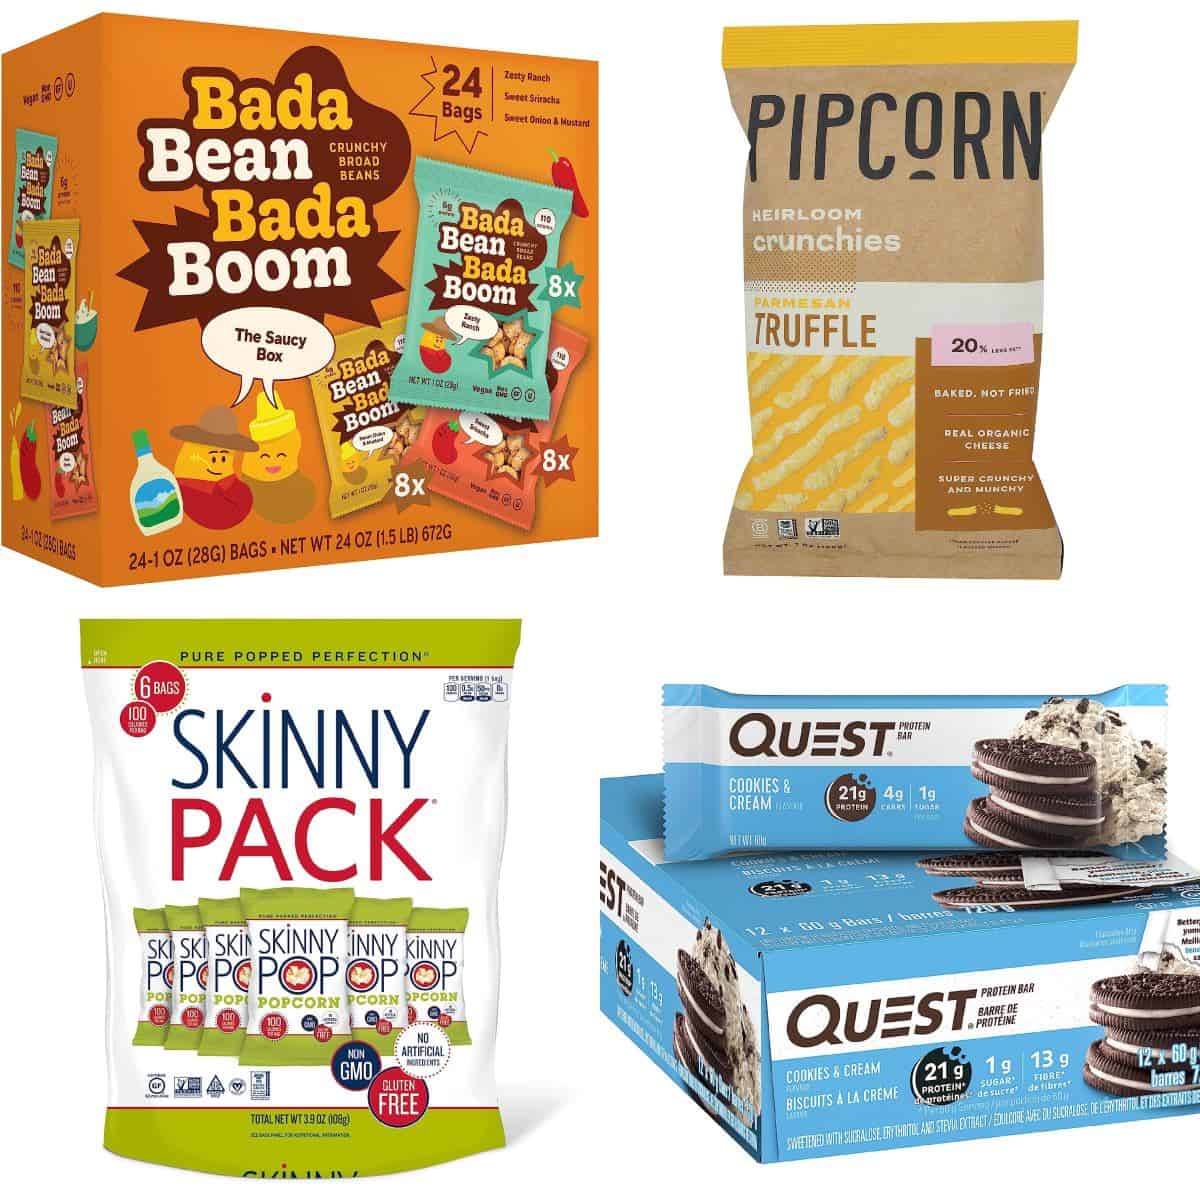 https://diabetesstrong.com/wp-content/uploads/2018/03/low-carb-packaged-snacks-1.jpg